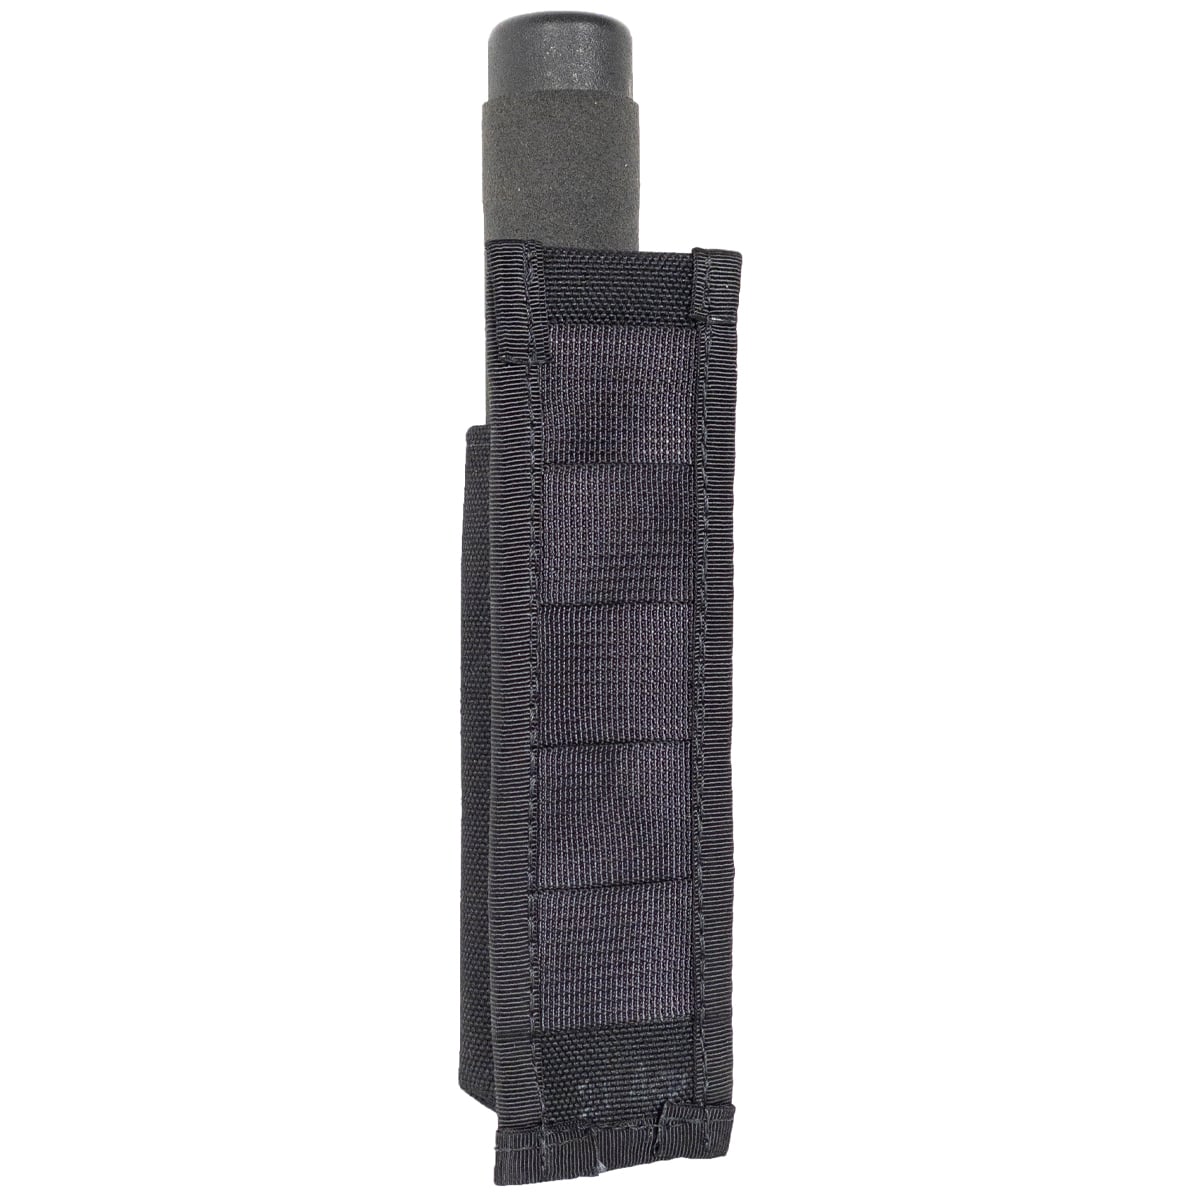 Open Baton Pocket Molle/PALS for Cowell Tactical Vests